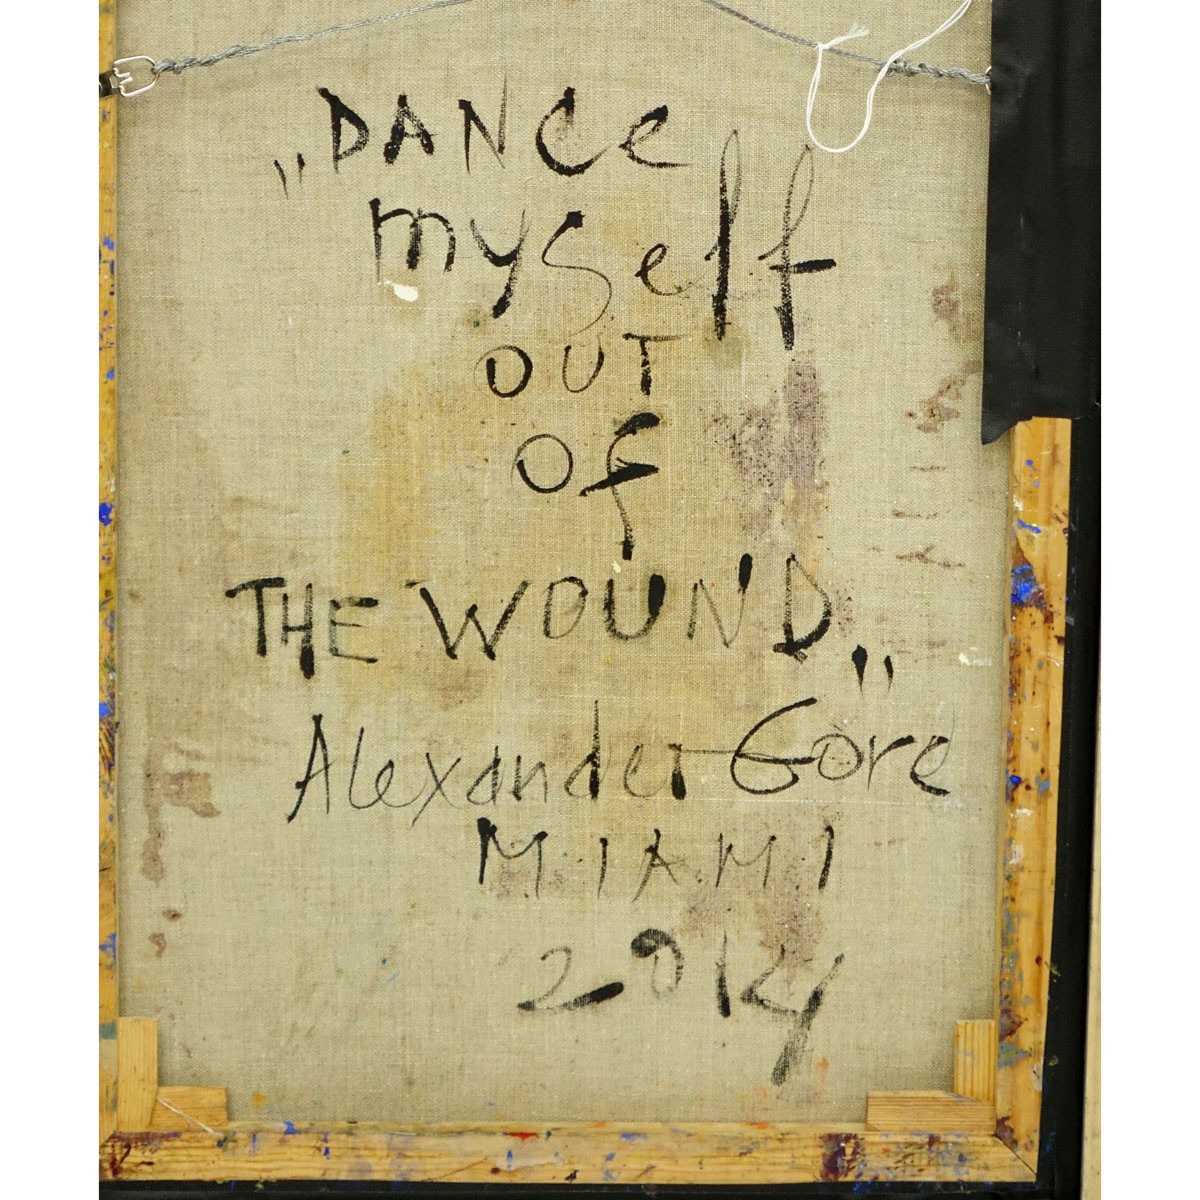 Alexander Gore, American/Russian (b.1958) Mixed Media "Dance Myself Out Of The Wound". Inscribed, signed and dated 2014 en verso.